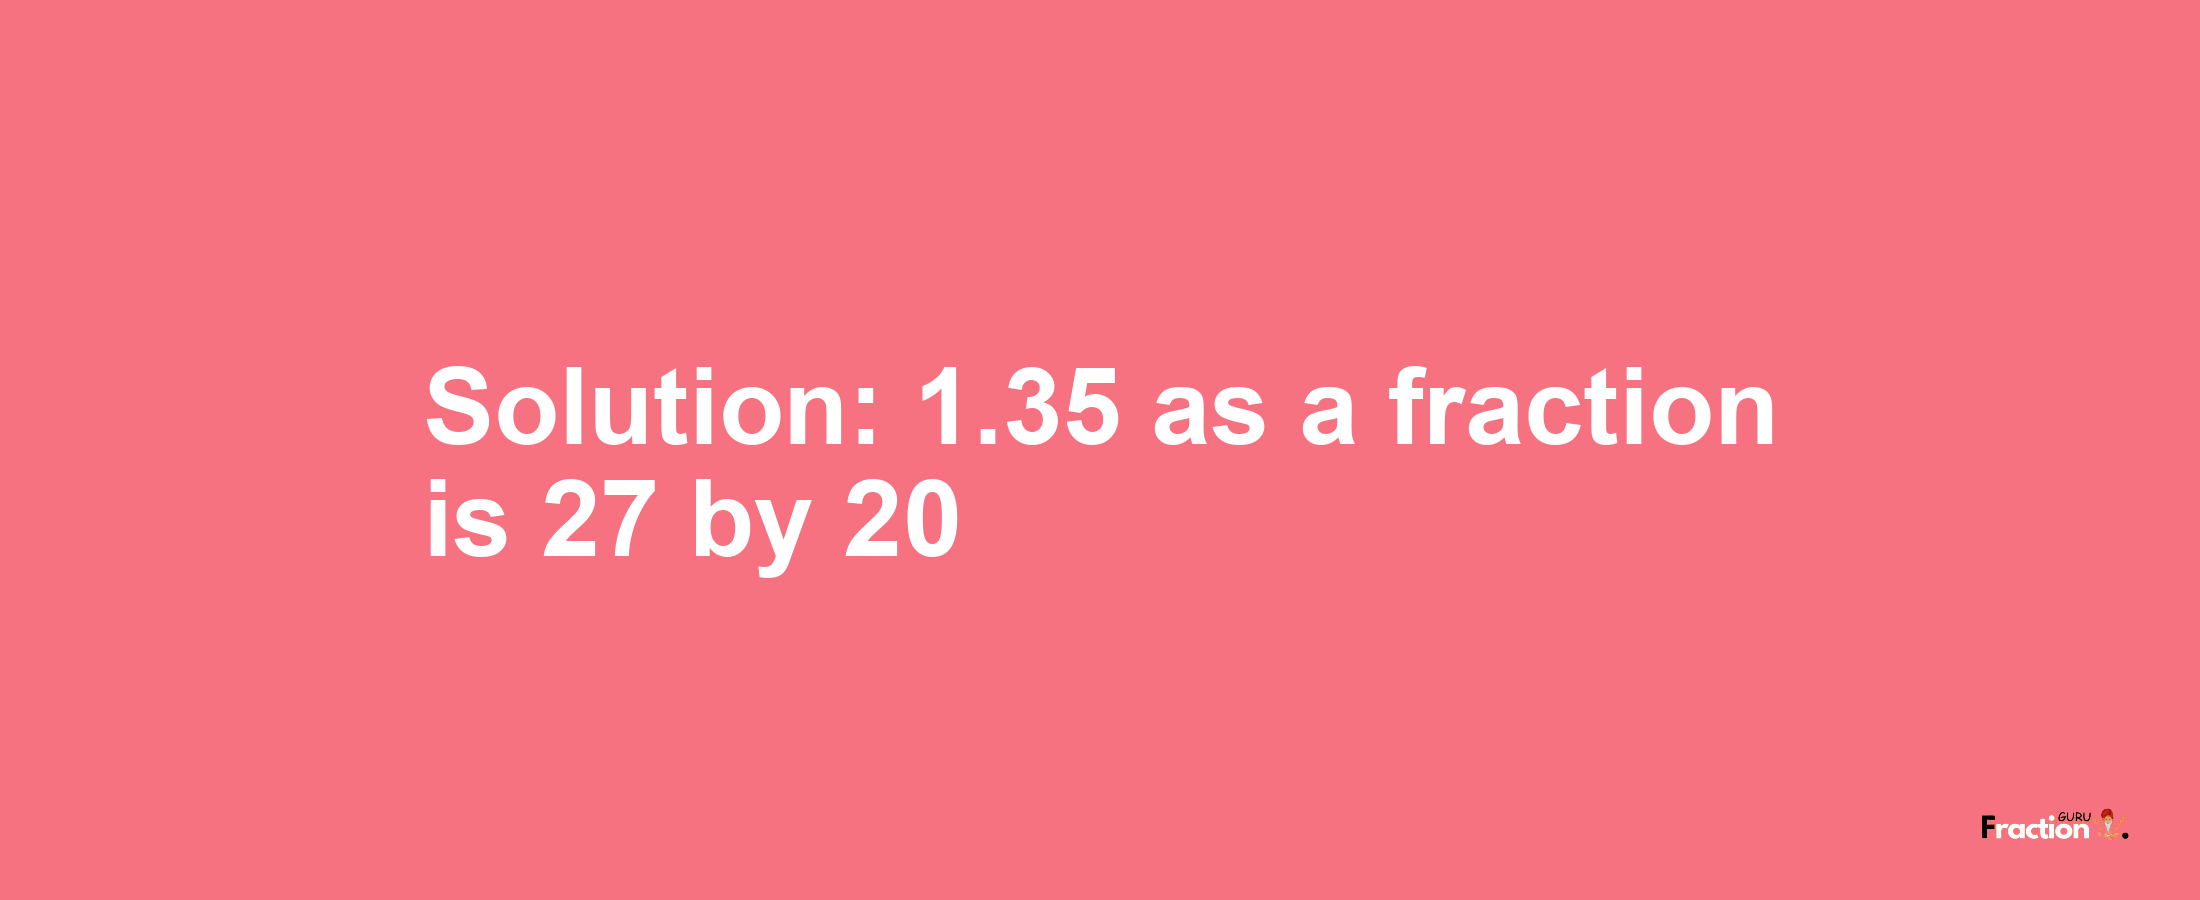 Solution:1.35 as a fraction is 27/20